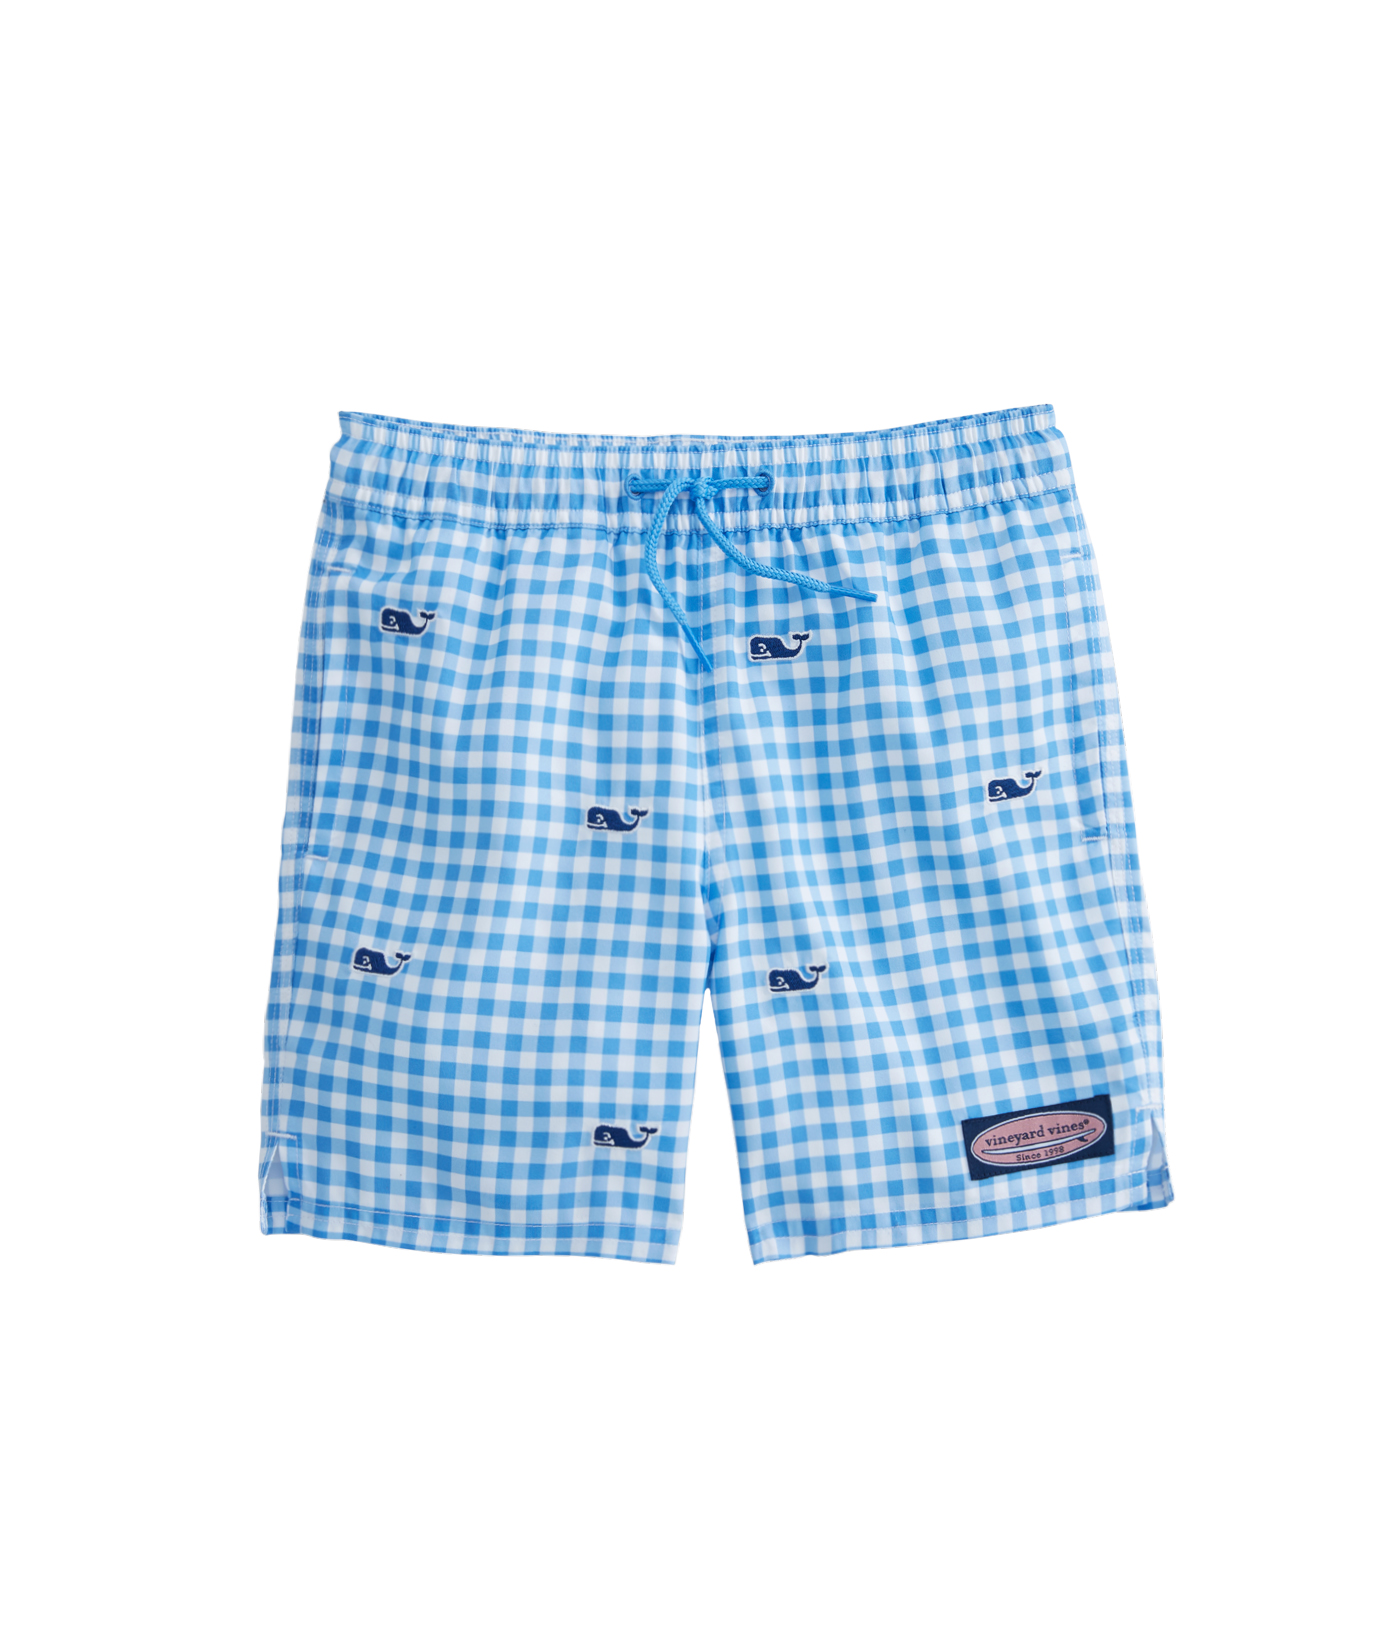 Shop Boys Gingham Whale Embroidered Chappy Trunks at vineyard vines